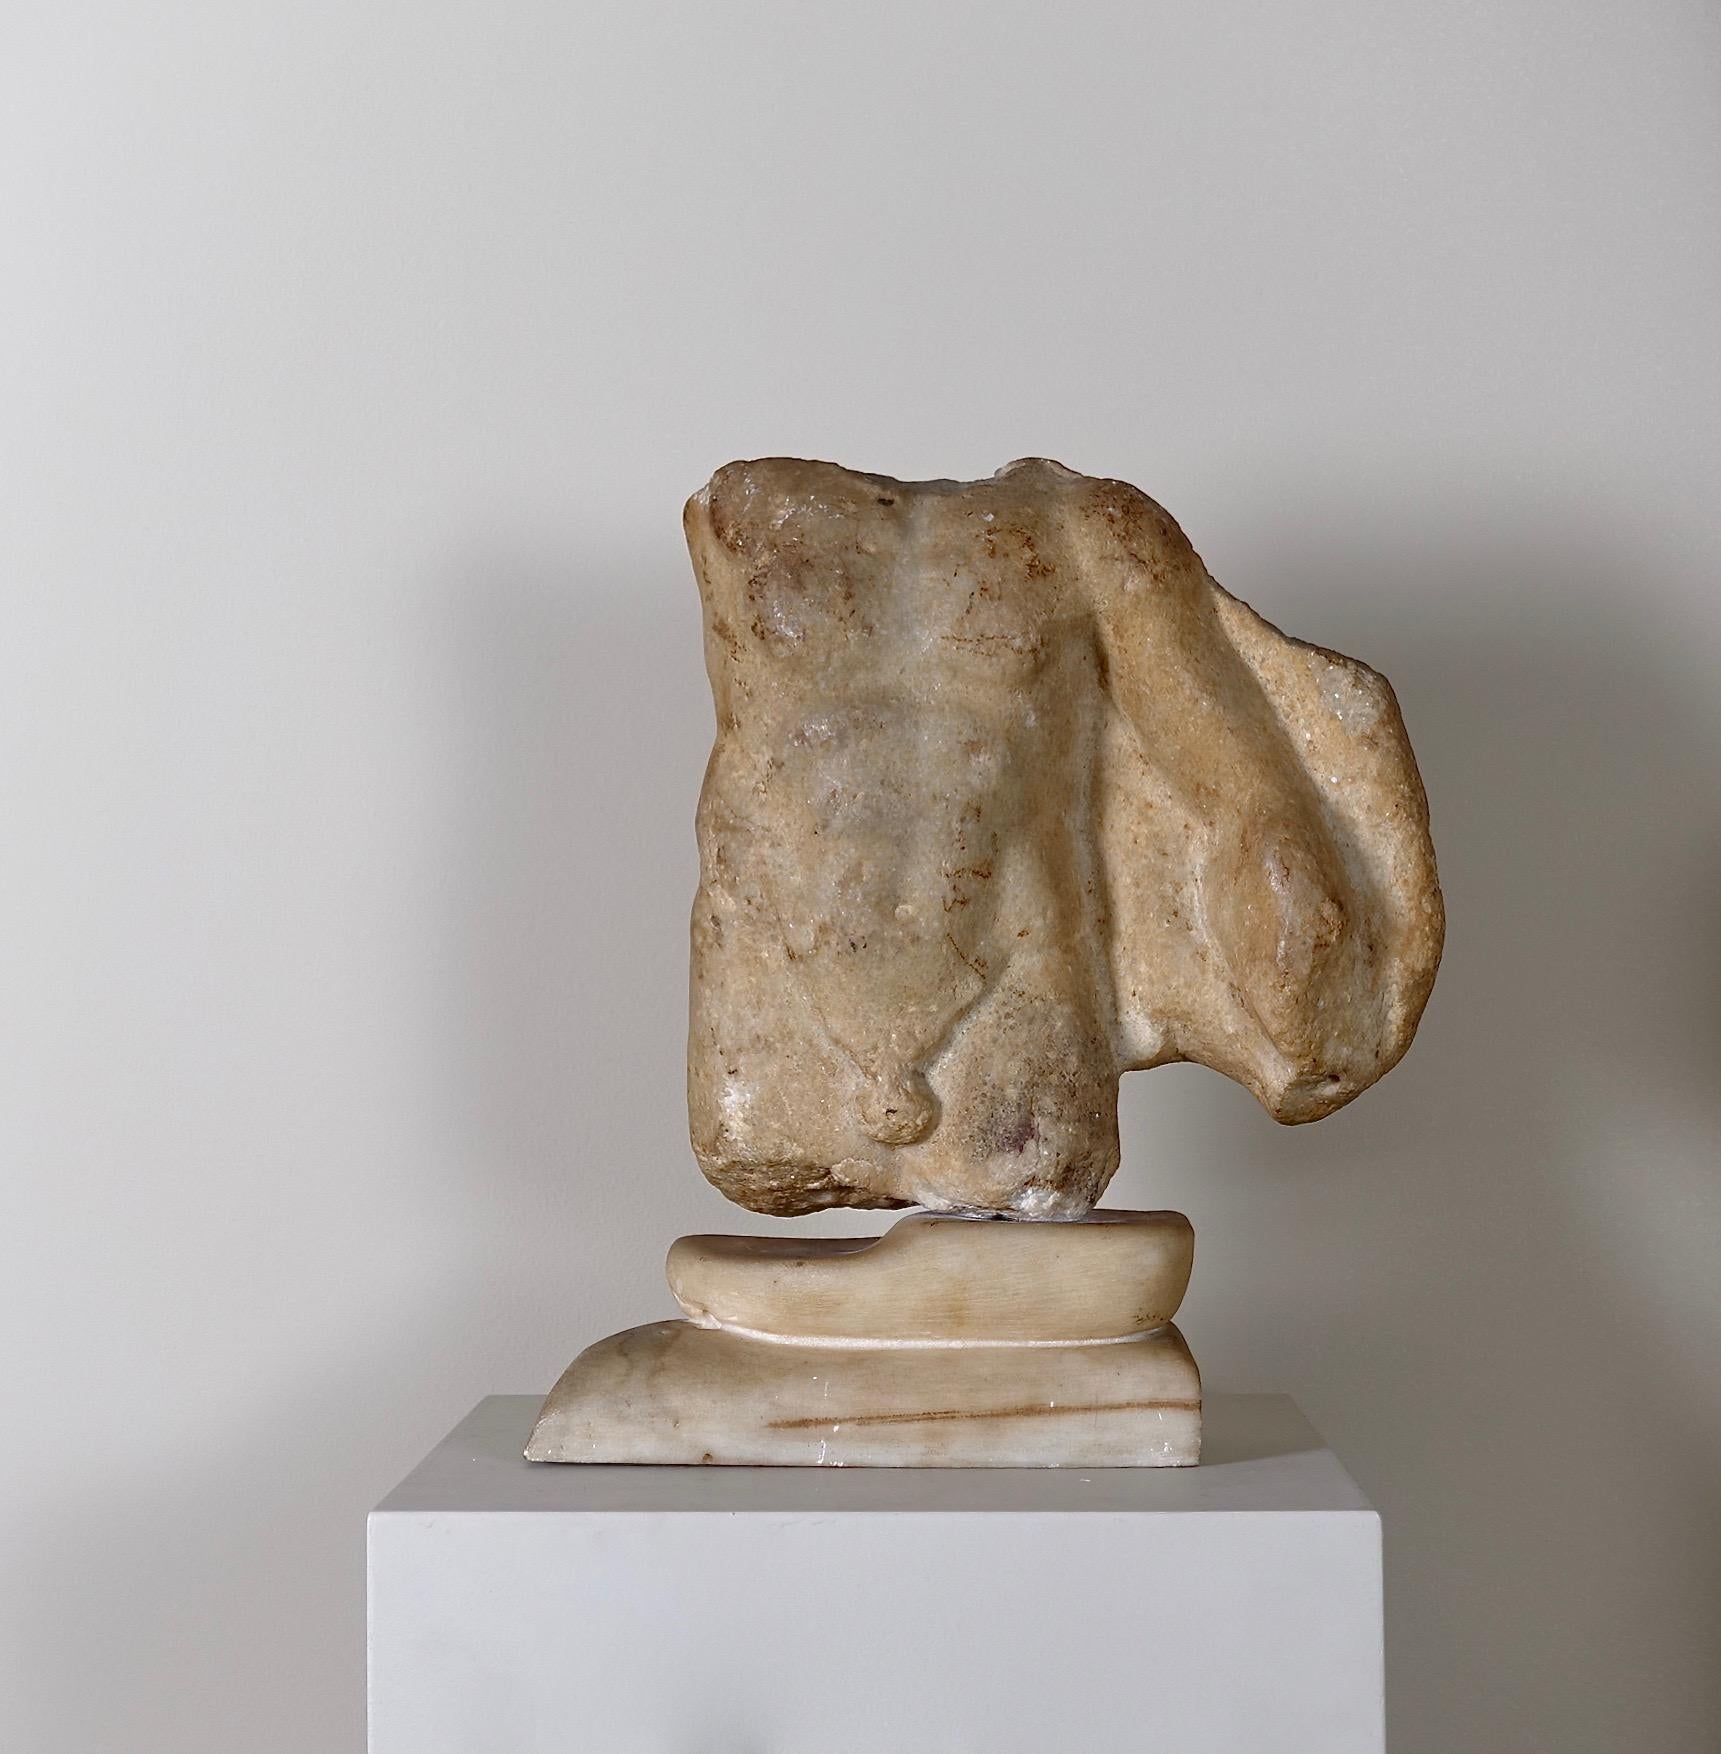 Carved Roman marble torso of a satyr - 2nd century AD